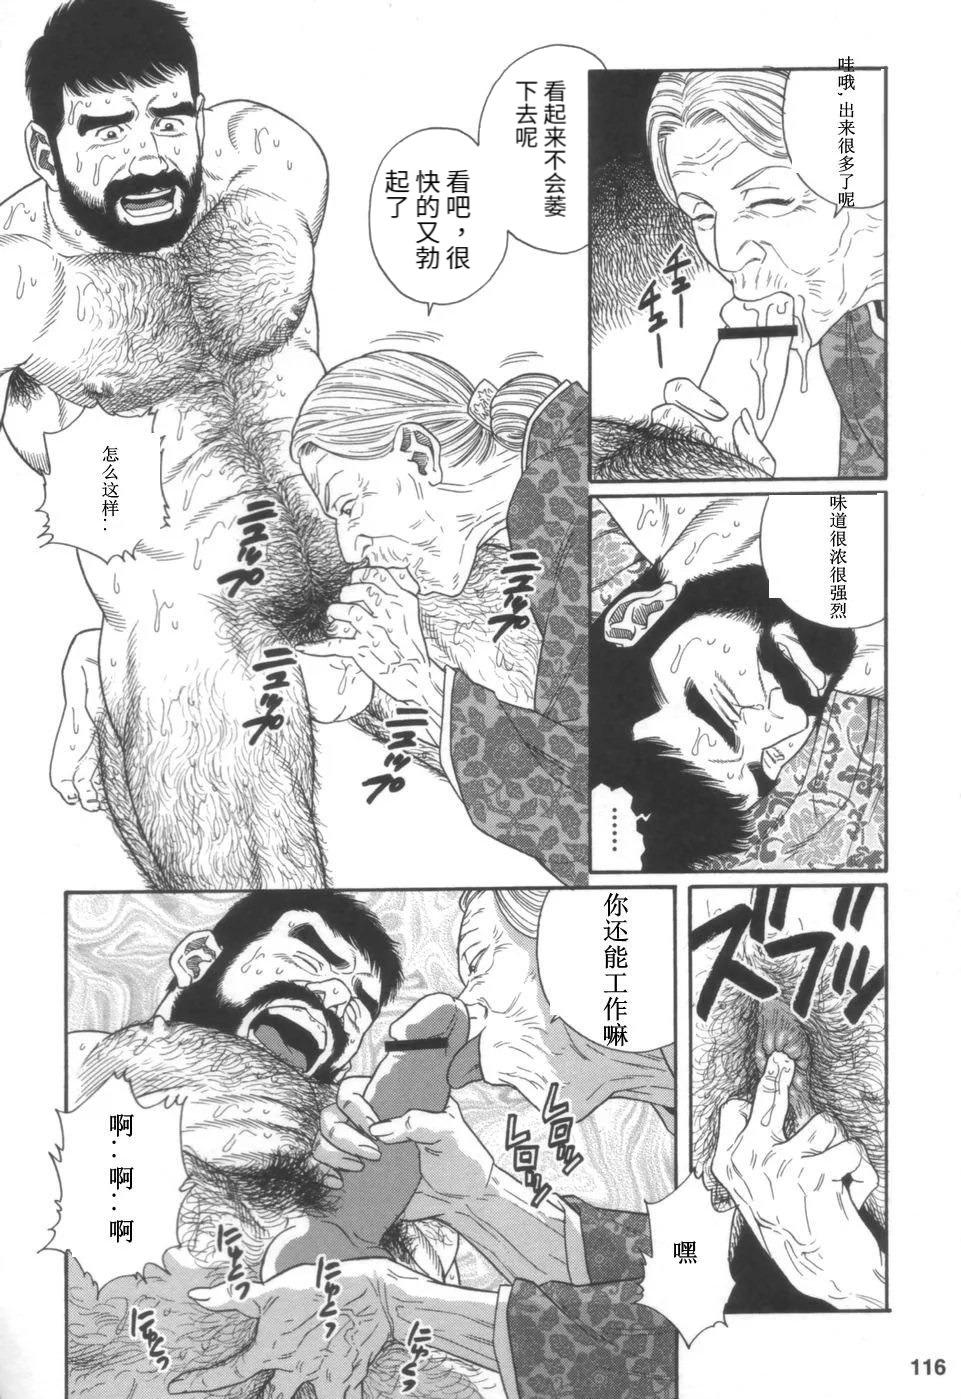 The Gedou no Ie Joukan | 邪道之家 Vol. 1 Ch.4 Leaked - Page 10